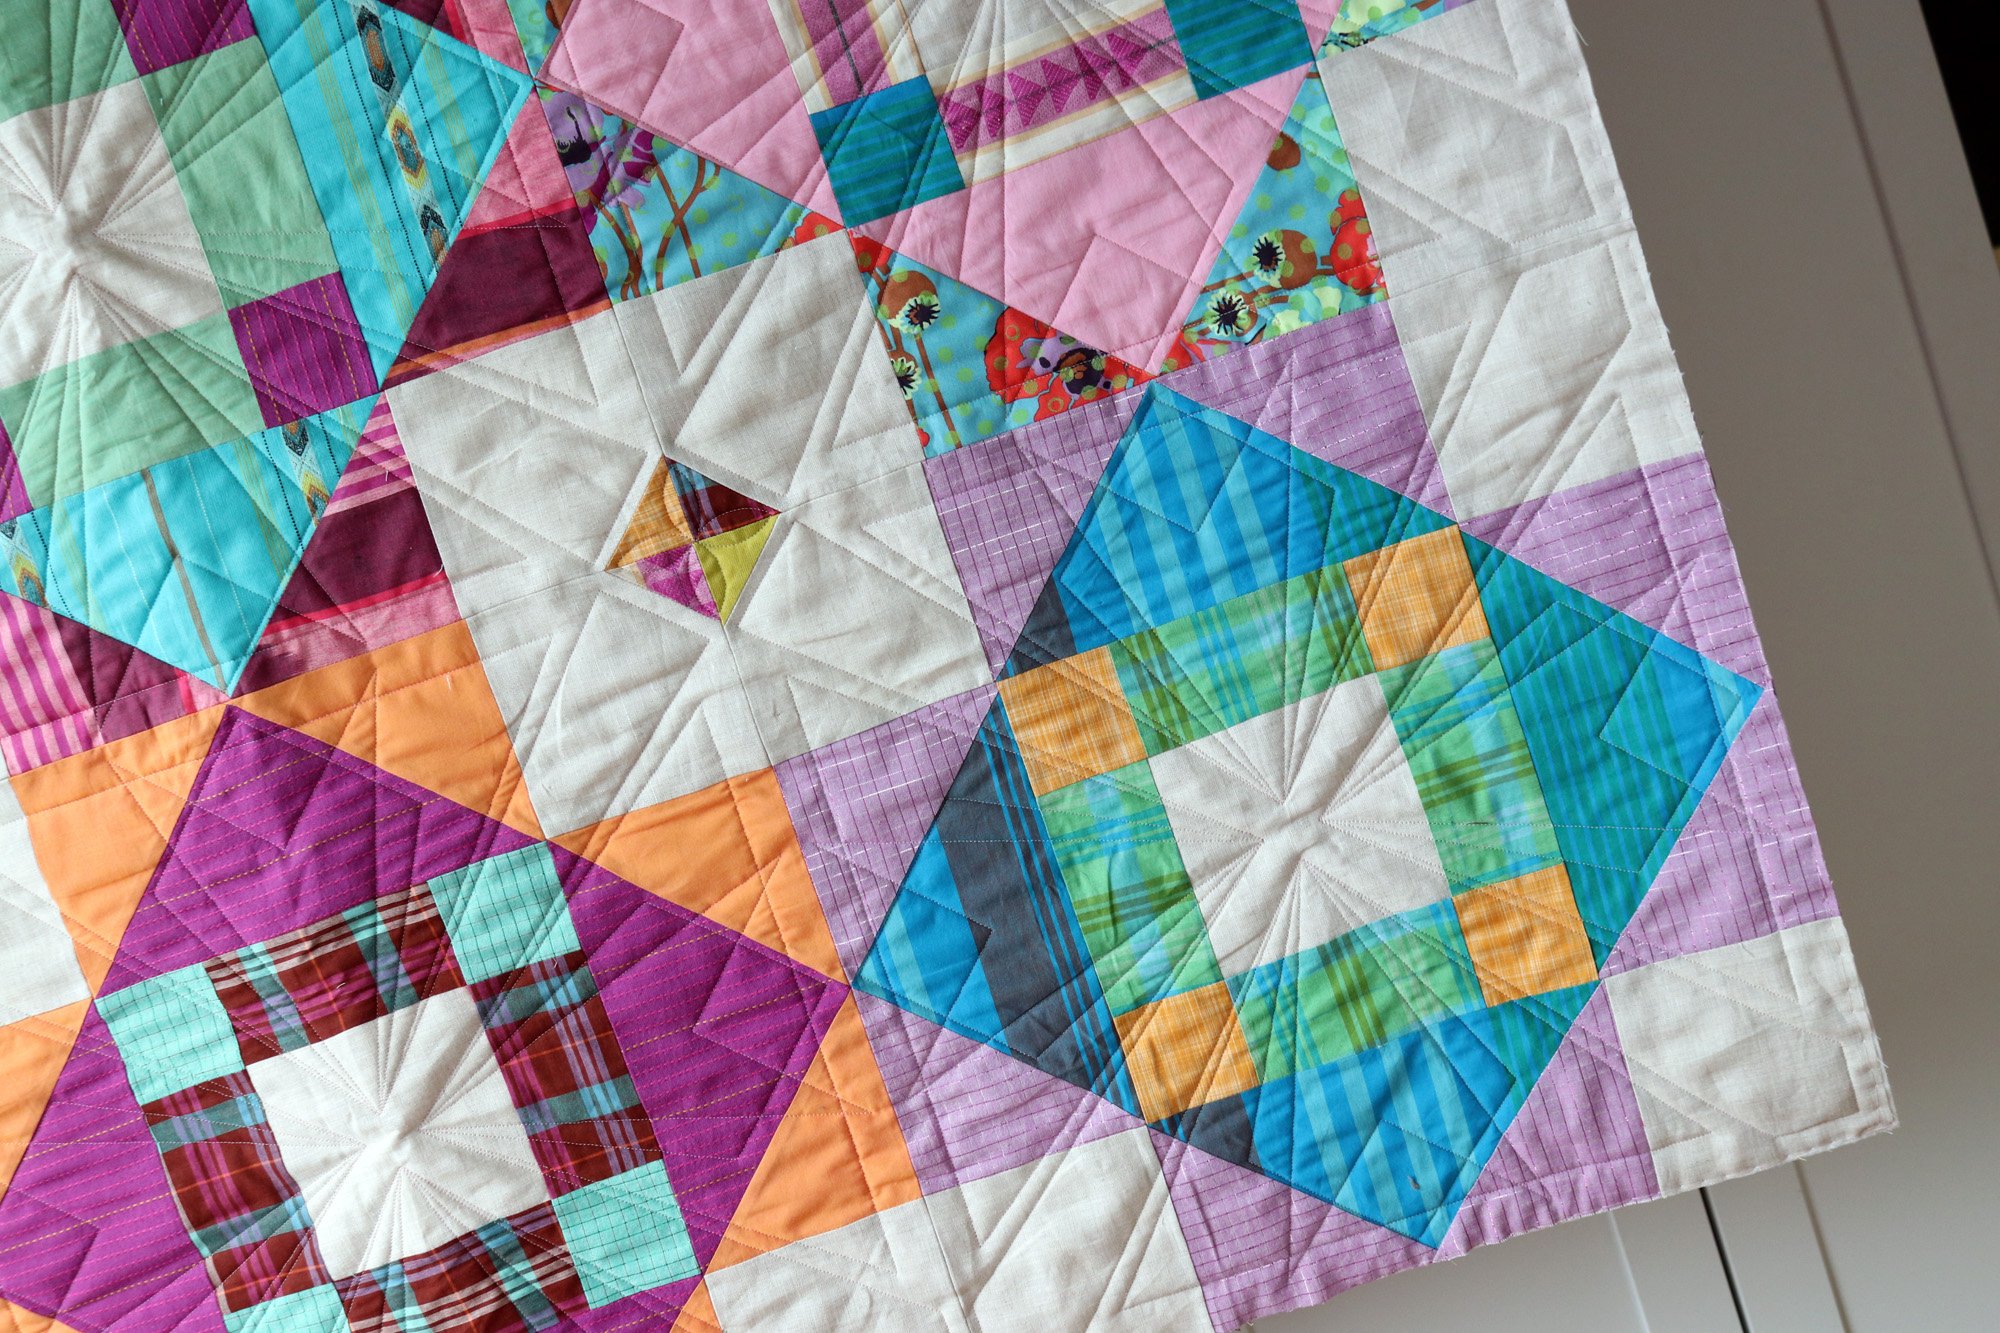 Bernette Review & Giveaway — Stitched in Color